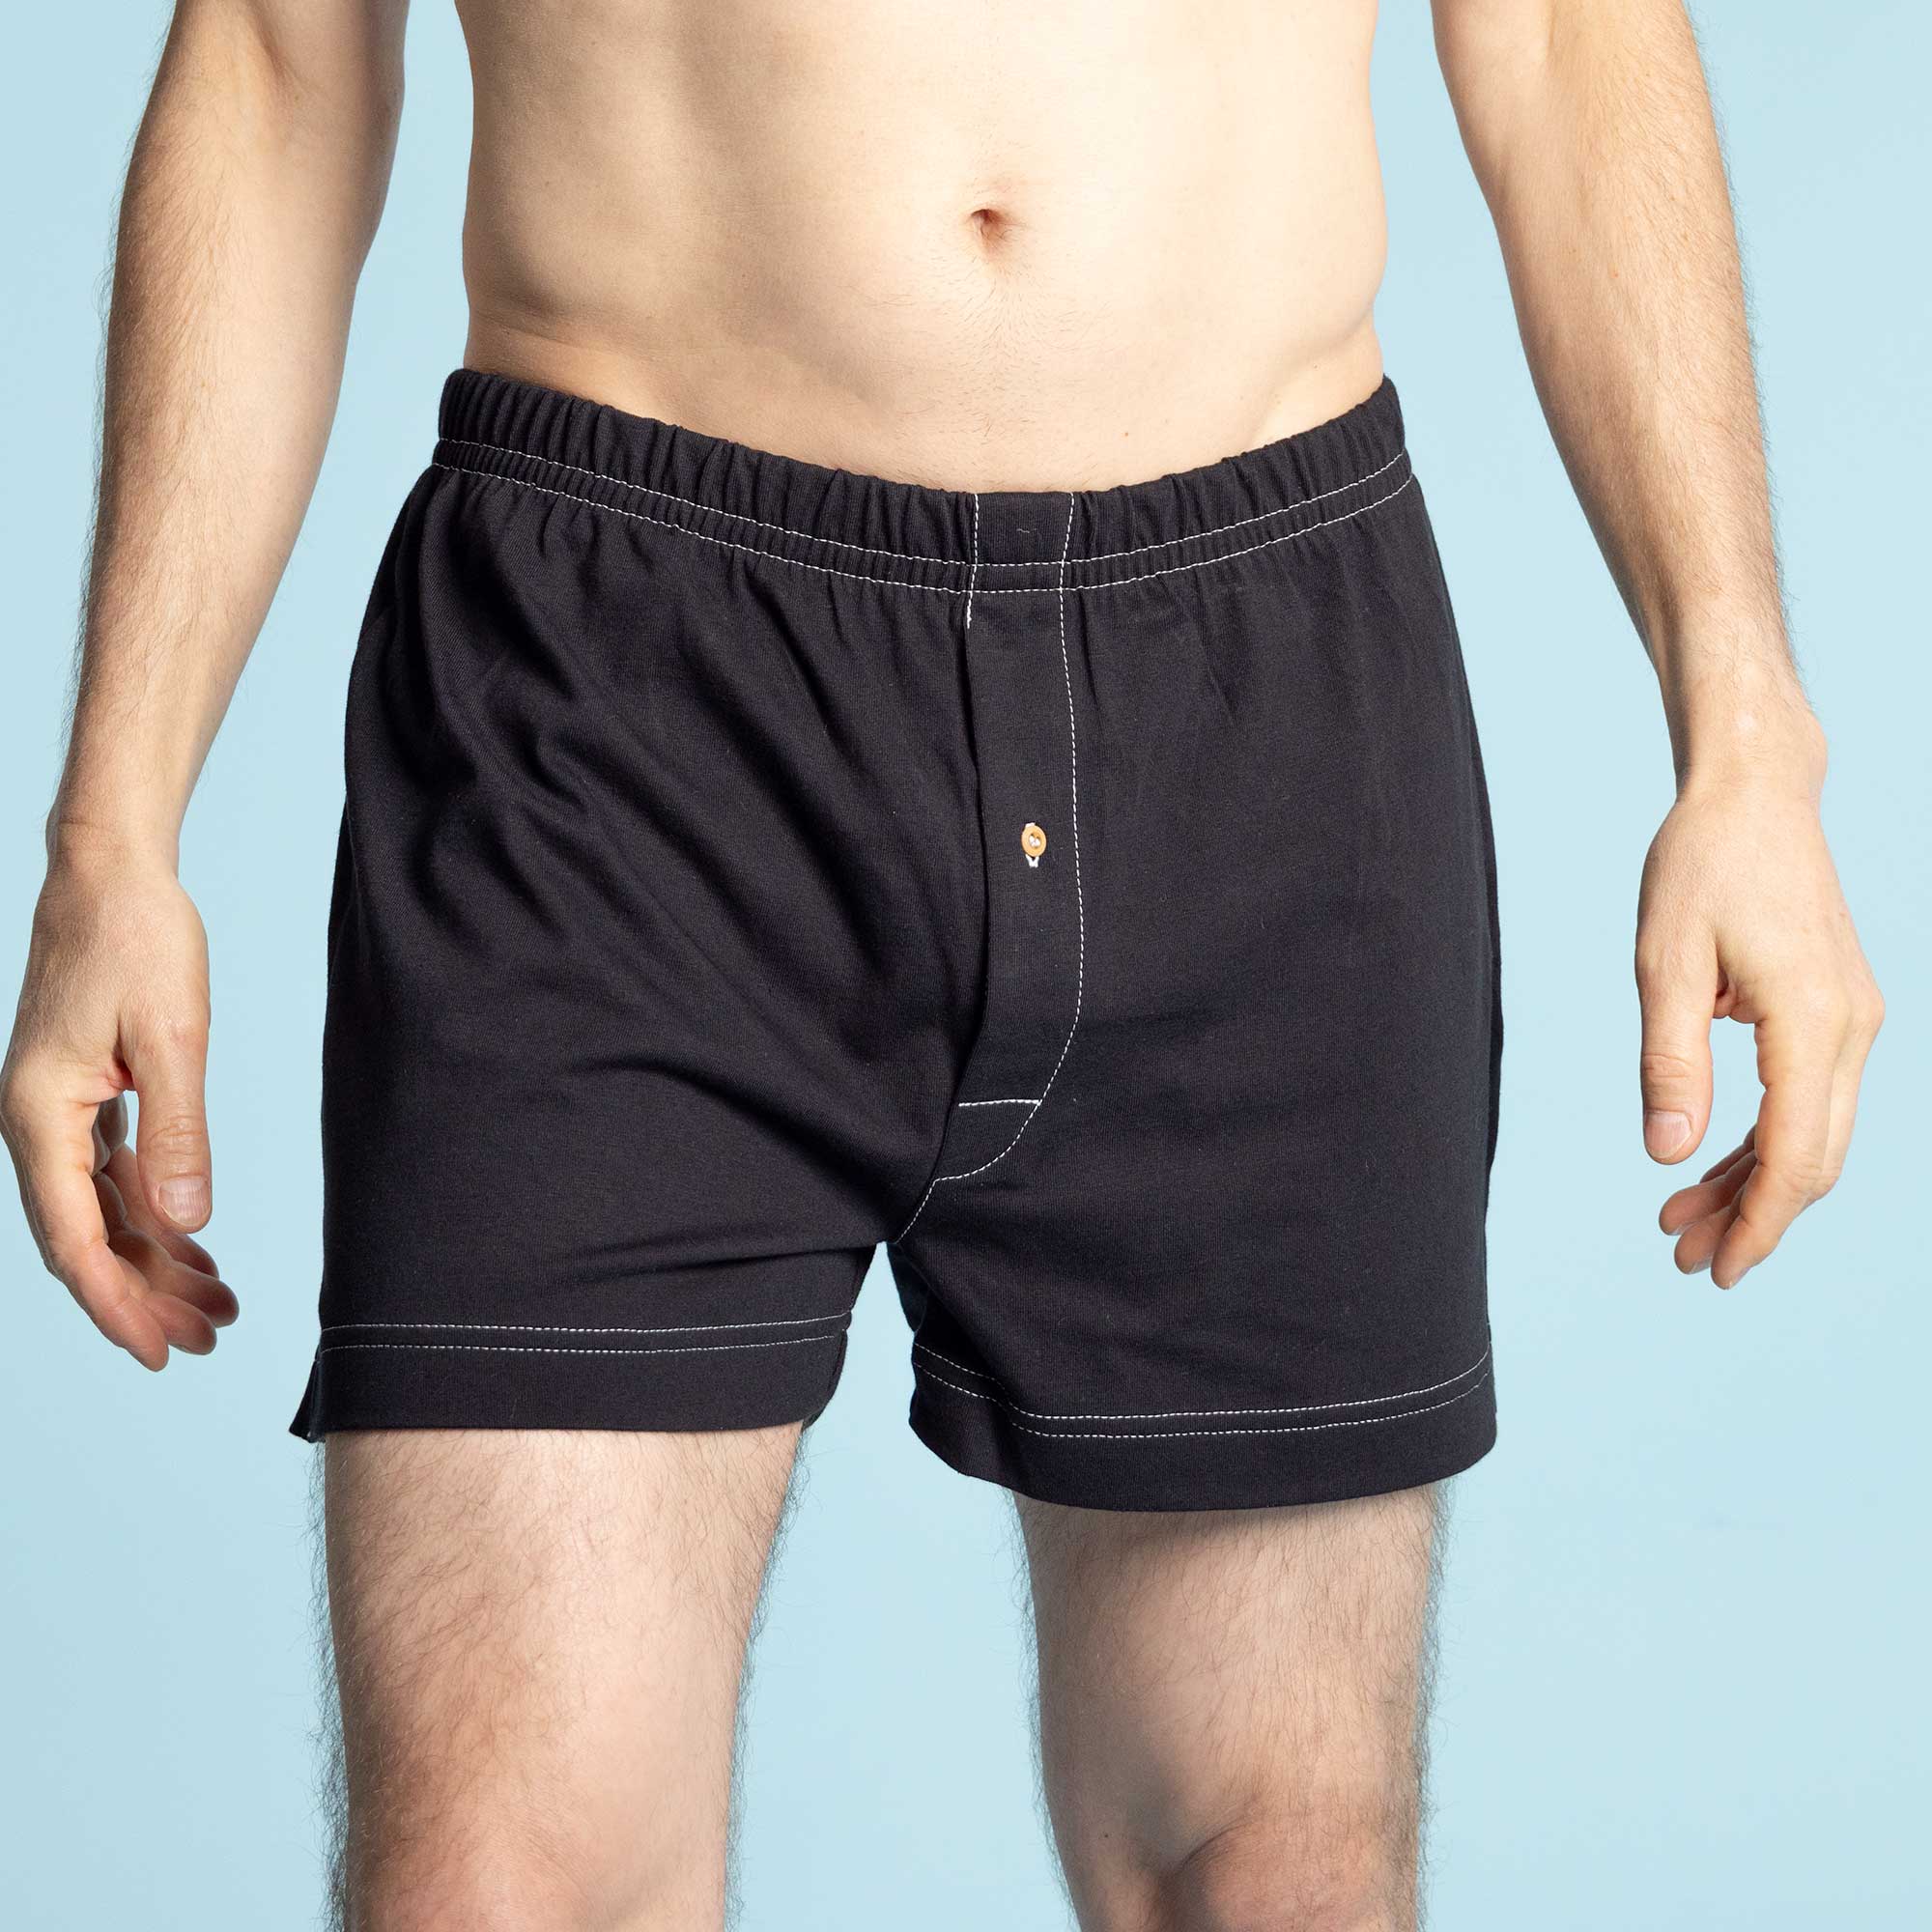  Lucky Brand Mens Underwear - Classic Knit Boxers